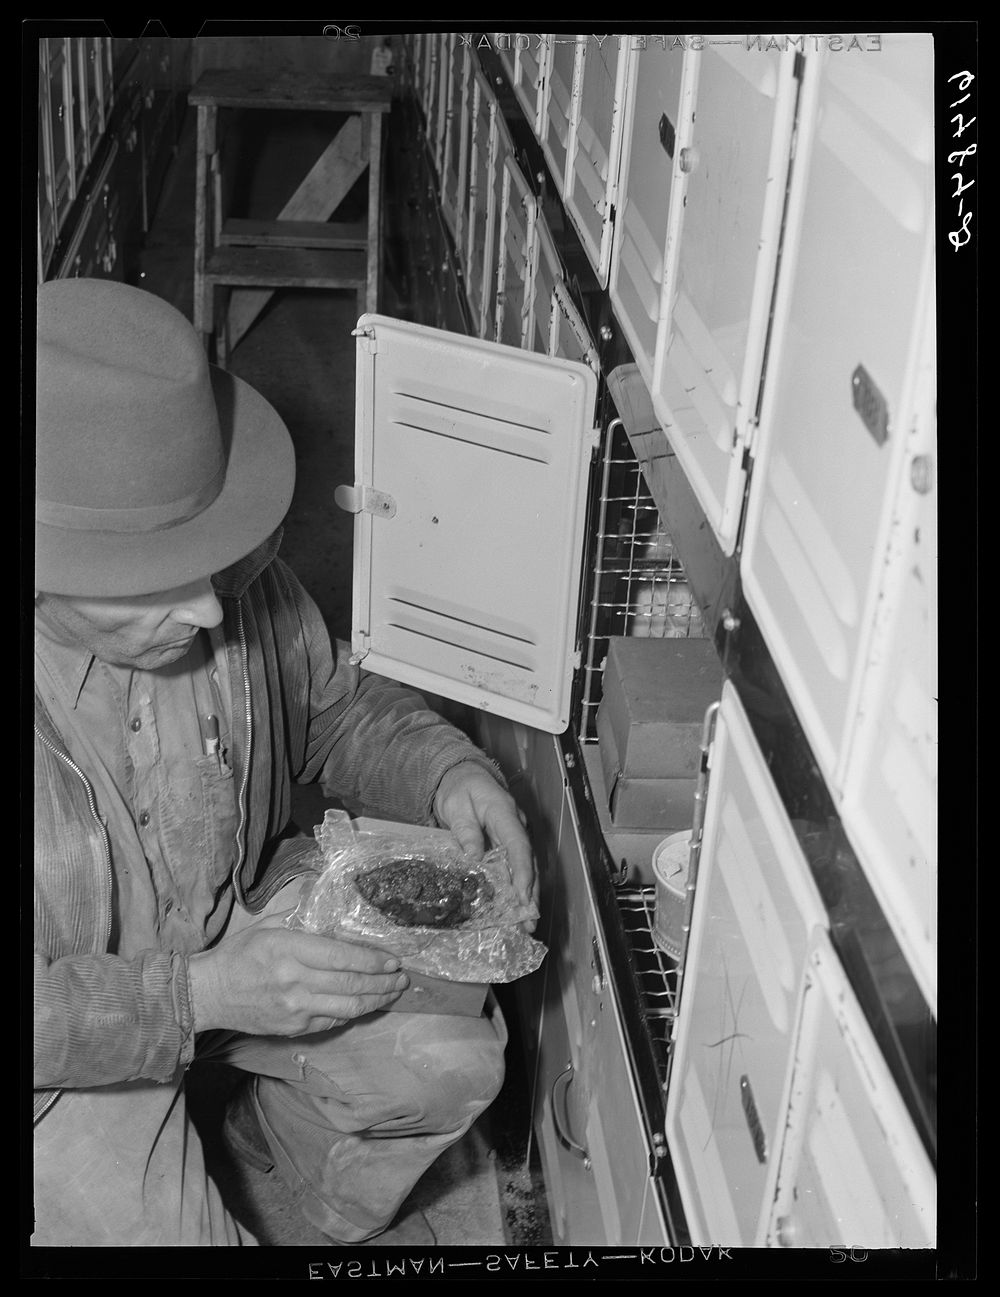 [Untitled photo, possibly related to: Getting meats out of cold storage locker. Hillsboro, North Dakota]. Sourced from the…